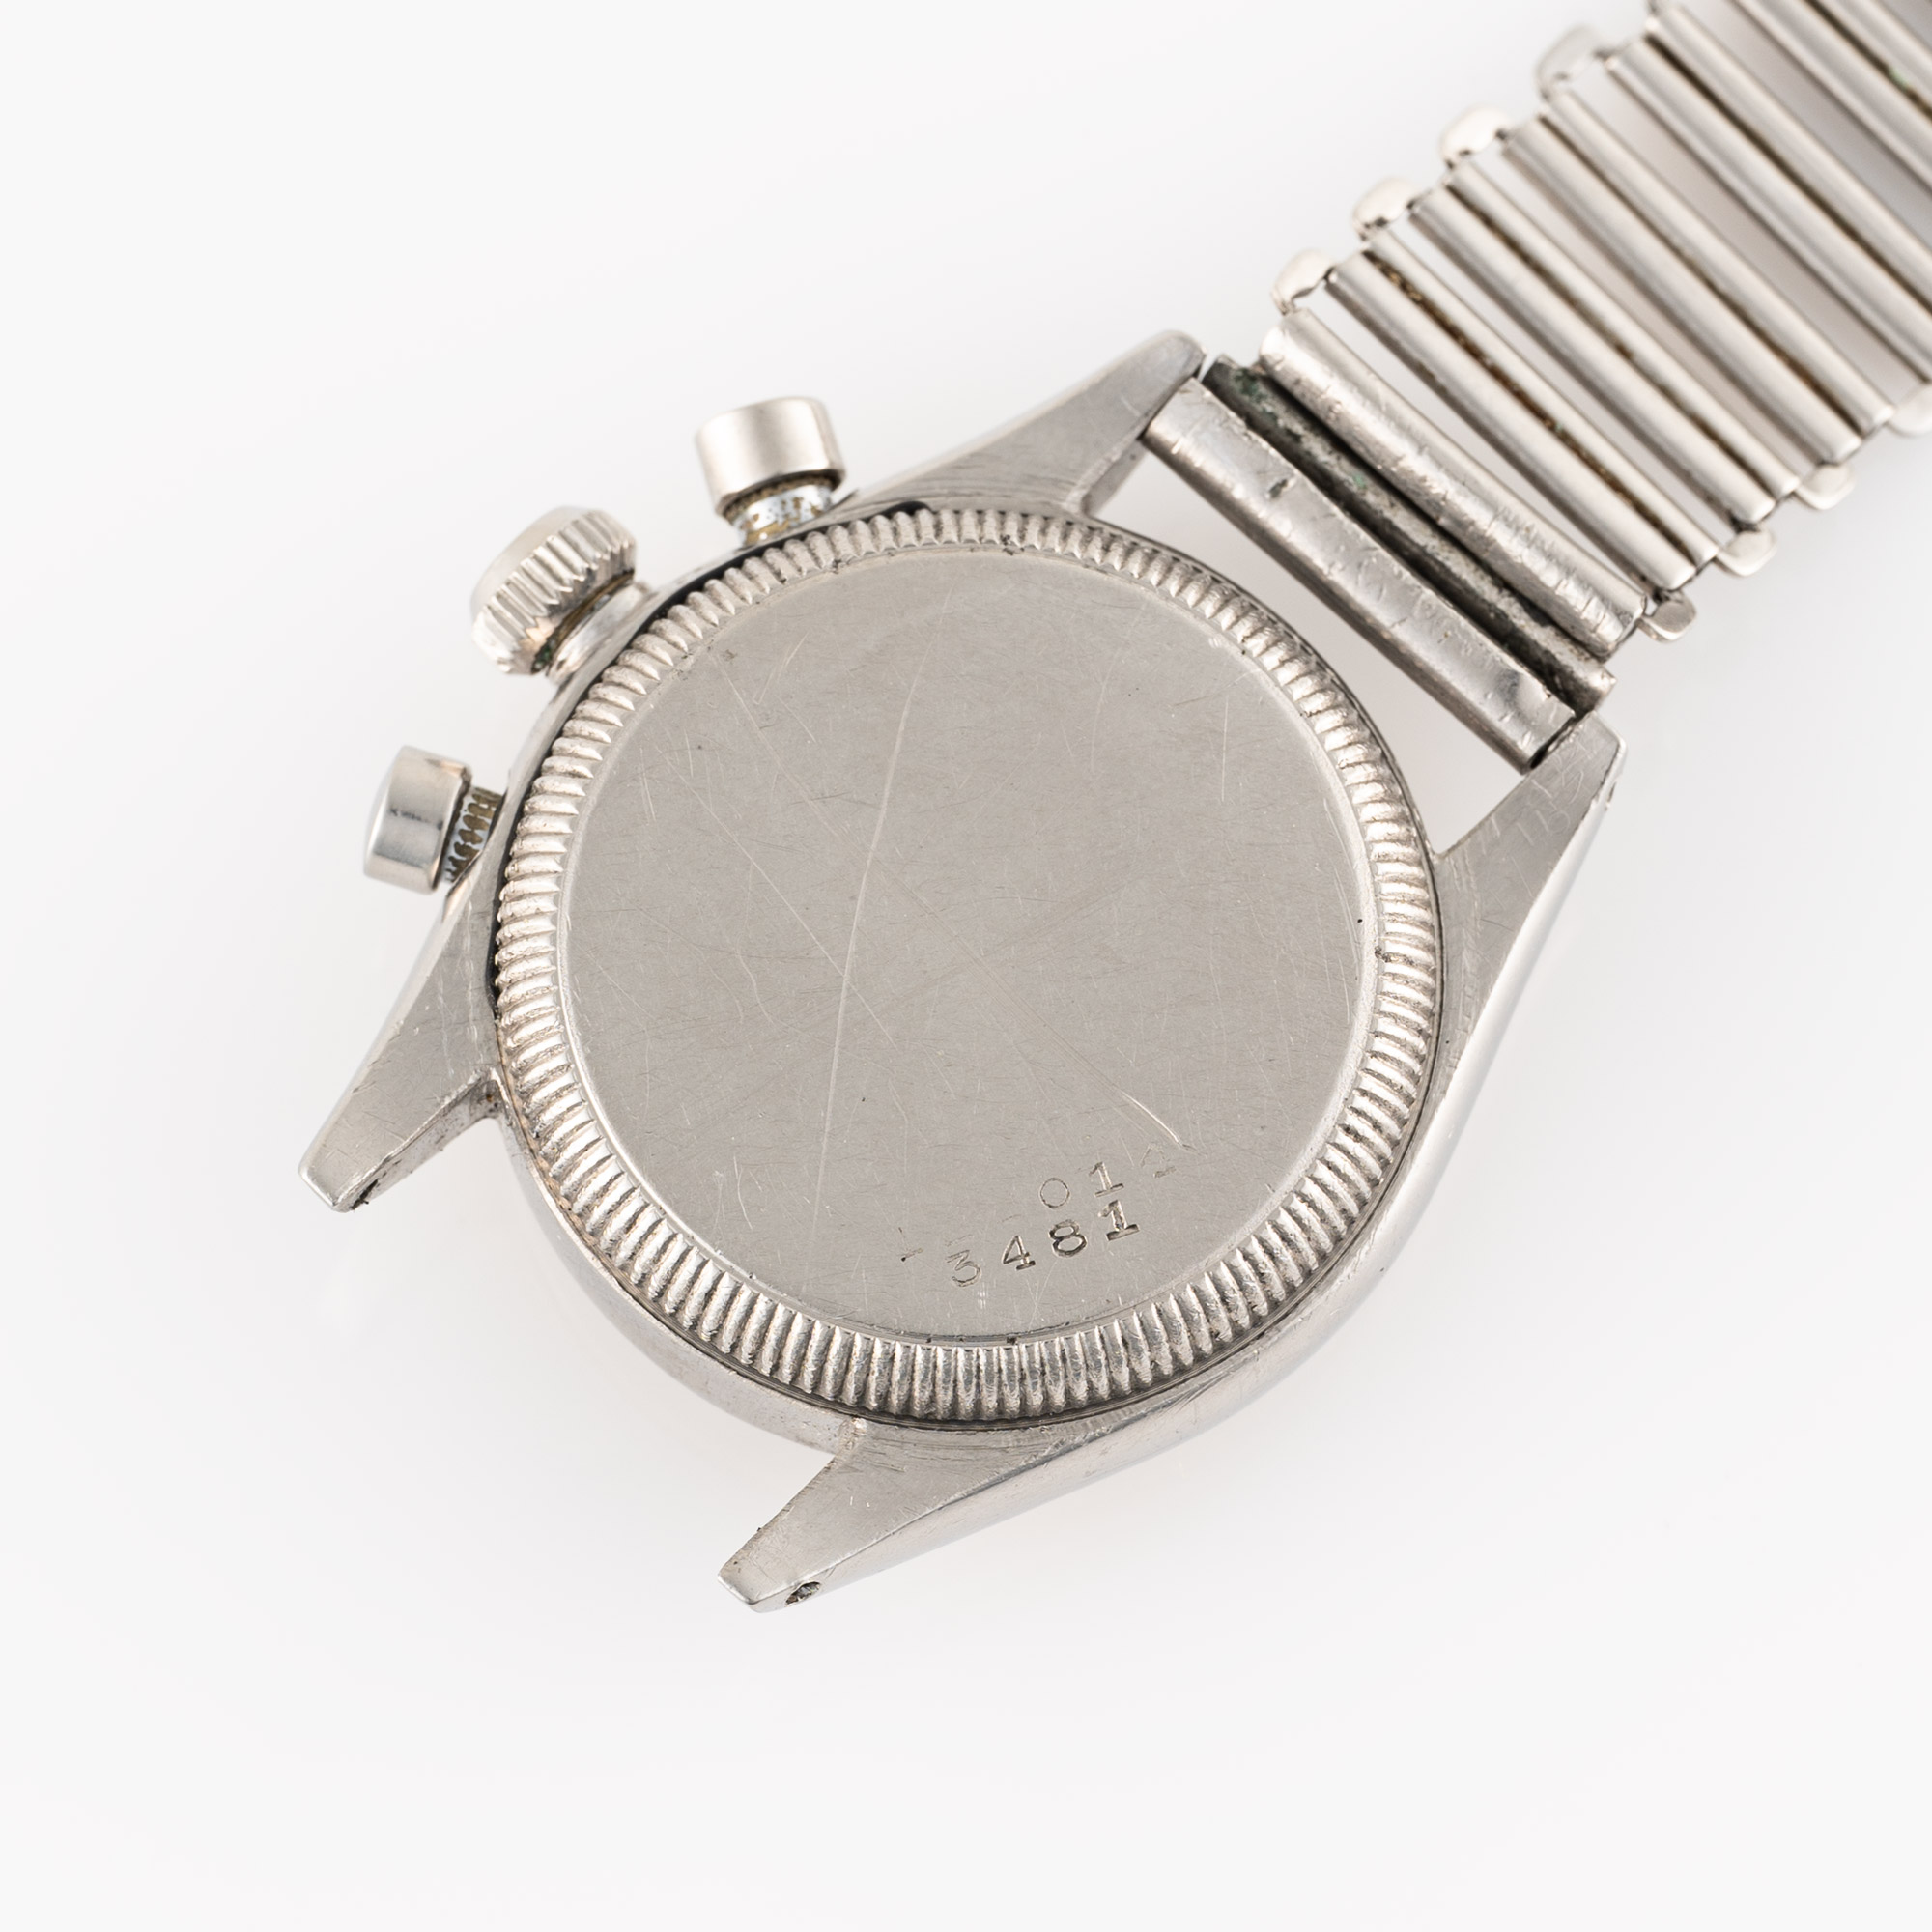 A VERY RARE GENTLEMAN'S SMALL SIZE STAINLESS STEEL ROLEX OYSTER CHRONOGRAPH WRIST WATCH CIRCA 1940s, - Image 7 of 9